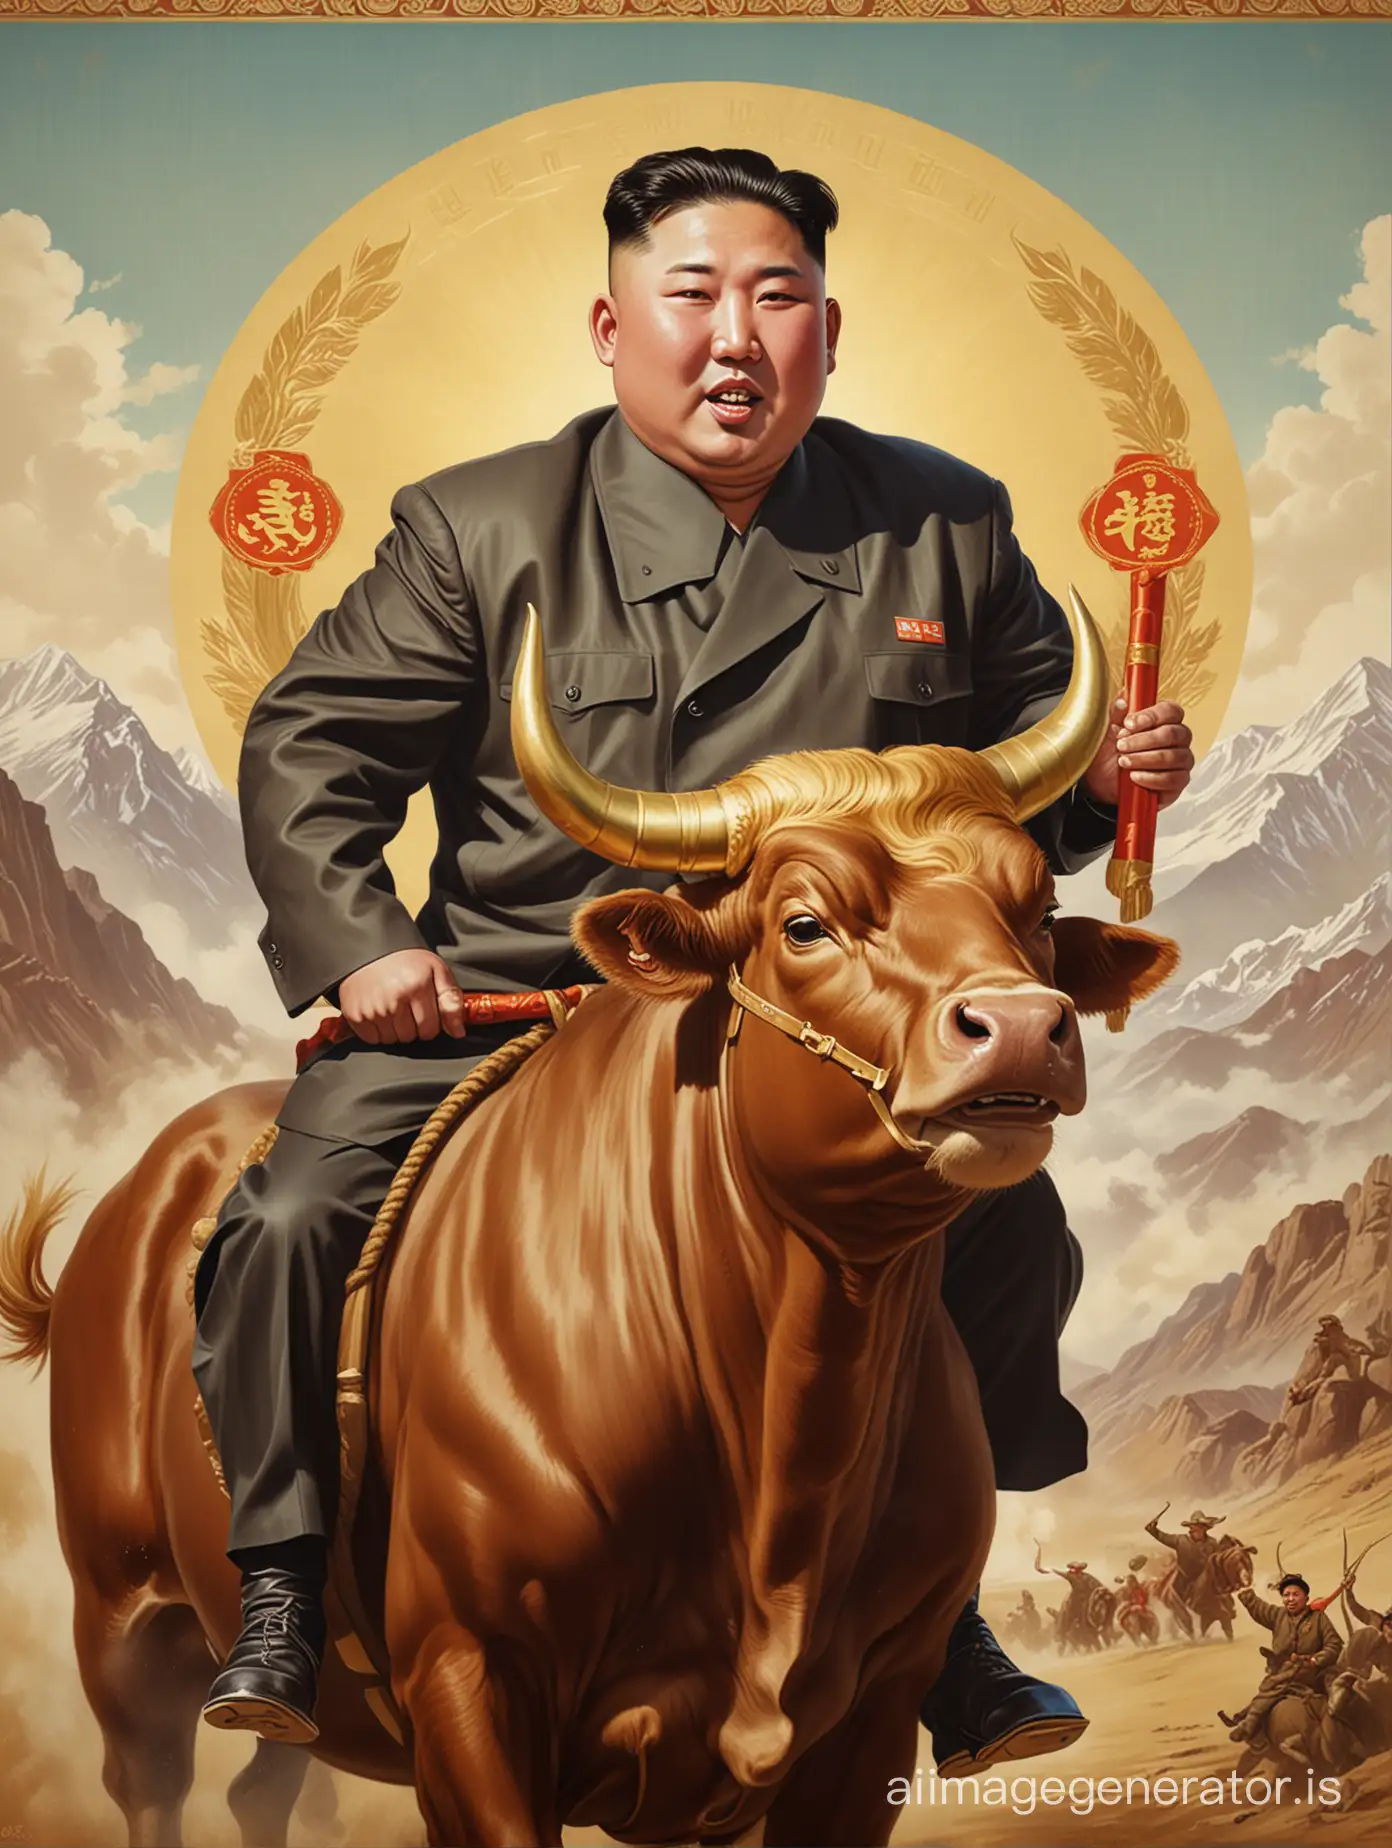 portrait of Kim Jong Un riding a bull with gold horns, in the style of a vintage propaganda poster